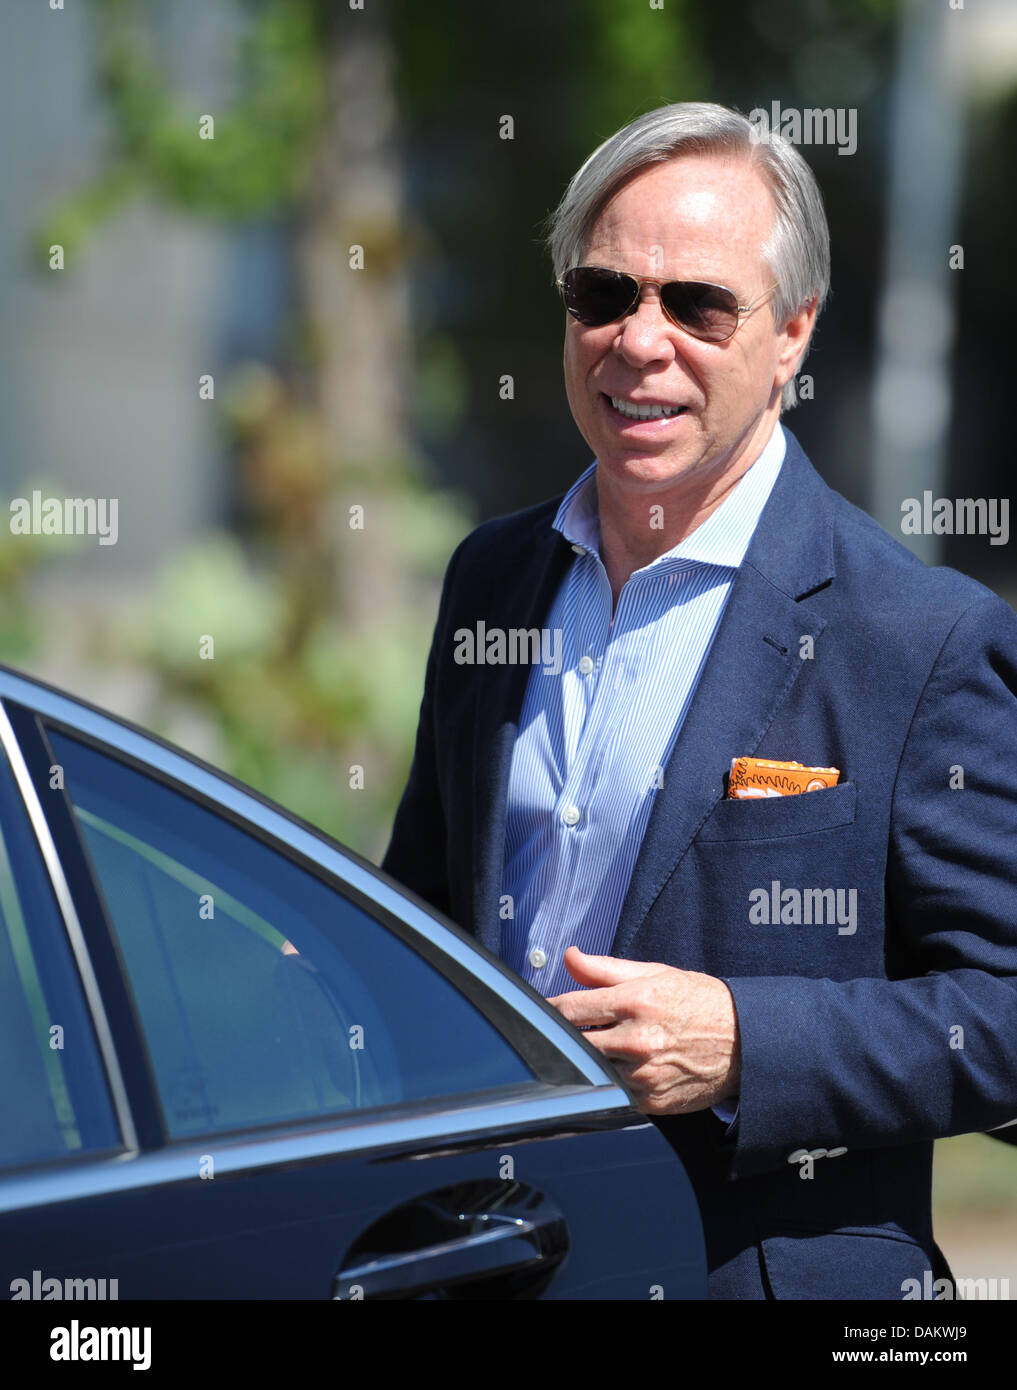 US fashion designer Tommy Hilfiger gets in his car after his visit to the  Akademie JAK for fashion design in Hamburg, Germany, 09 May 2011. Hilfiger  discussed his typical "preppy style" with